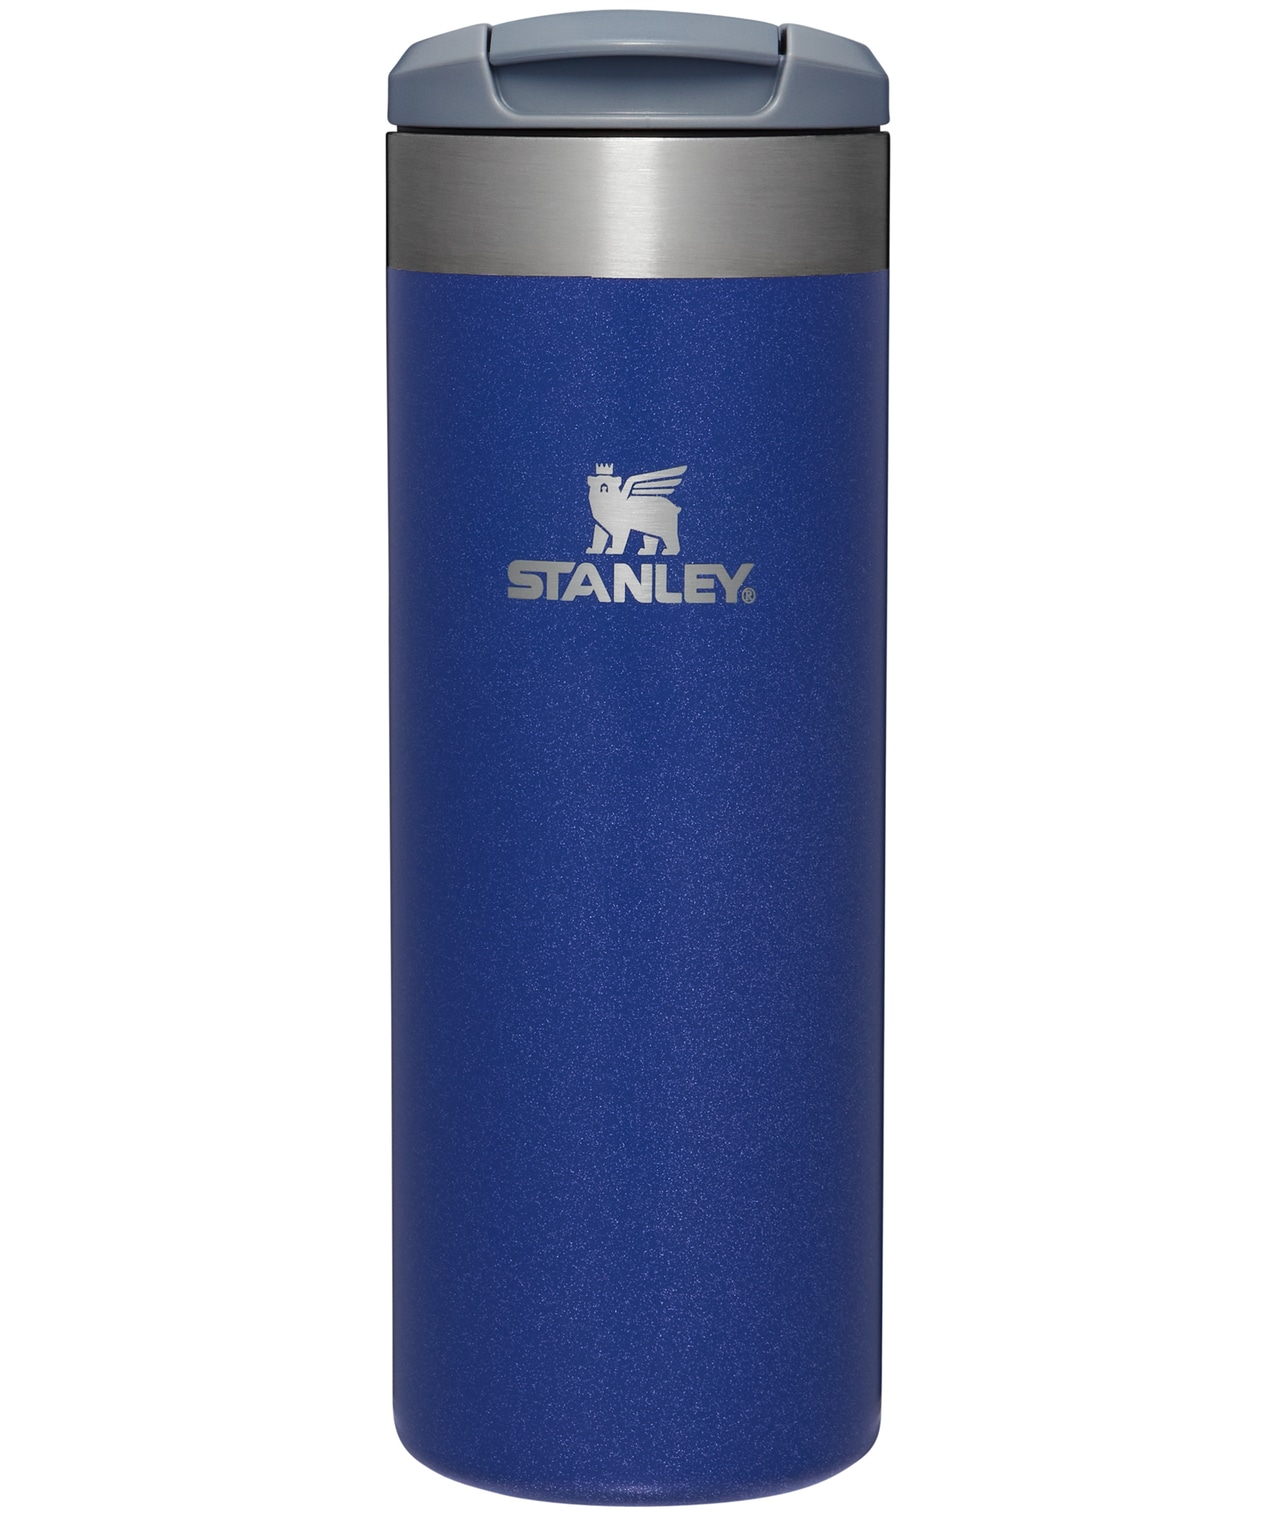 Stanley 16-fl oz Stainless Steel Insulated Tumbler in the Water